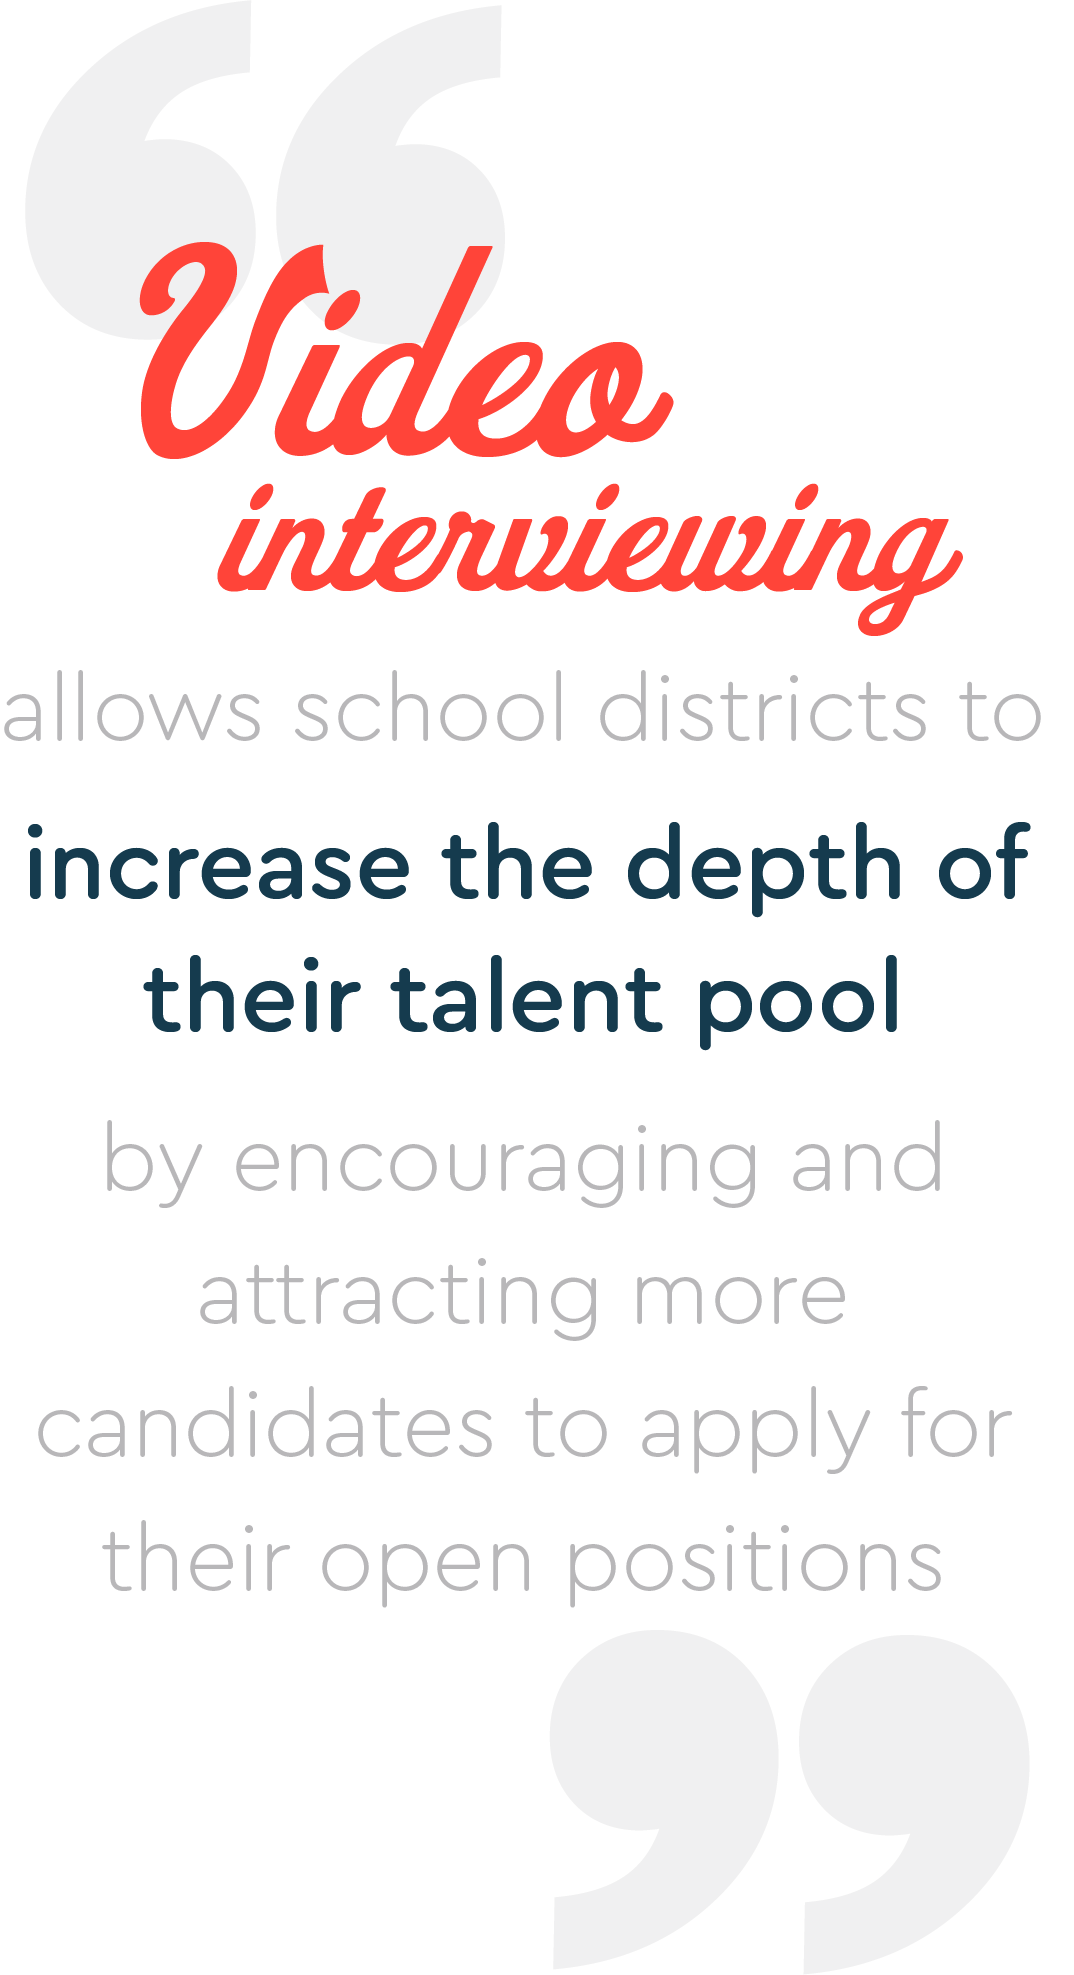 Video interviewing allows school districts to increase their talent pool pull quote